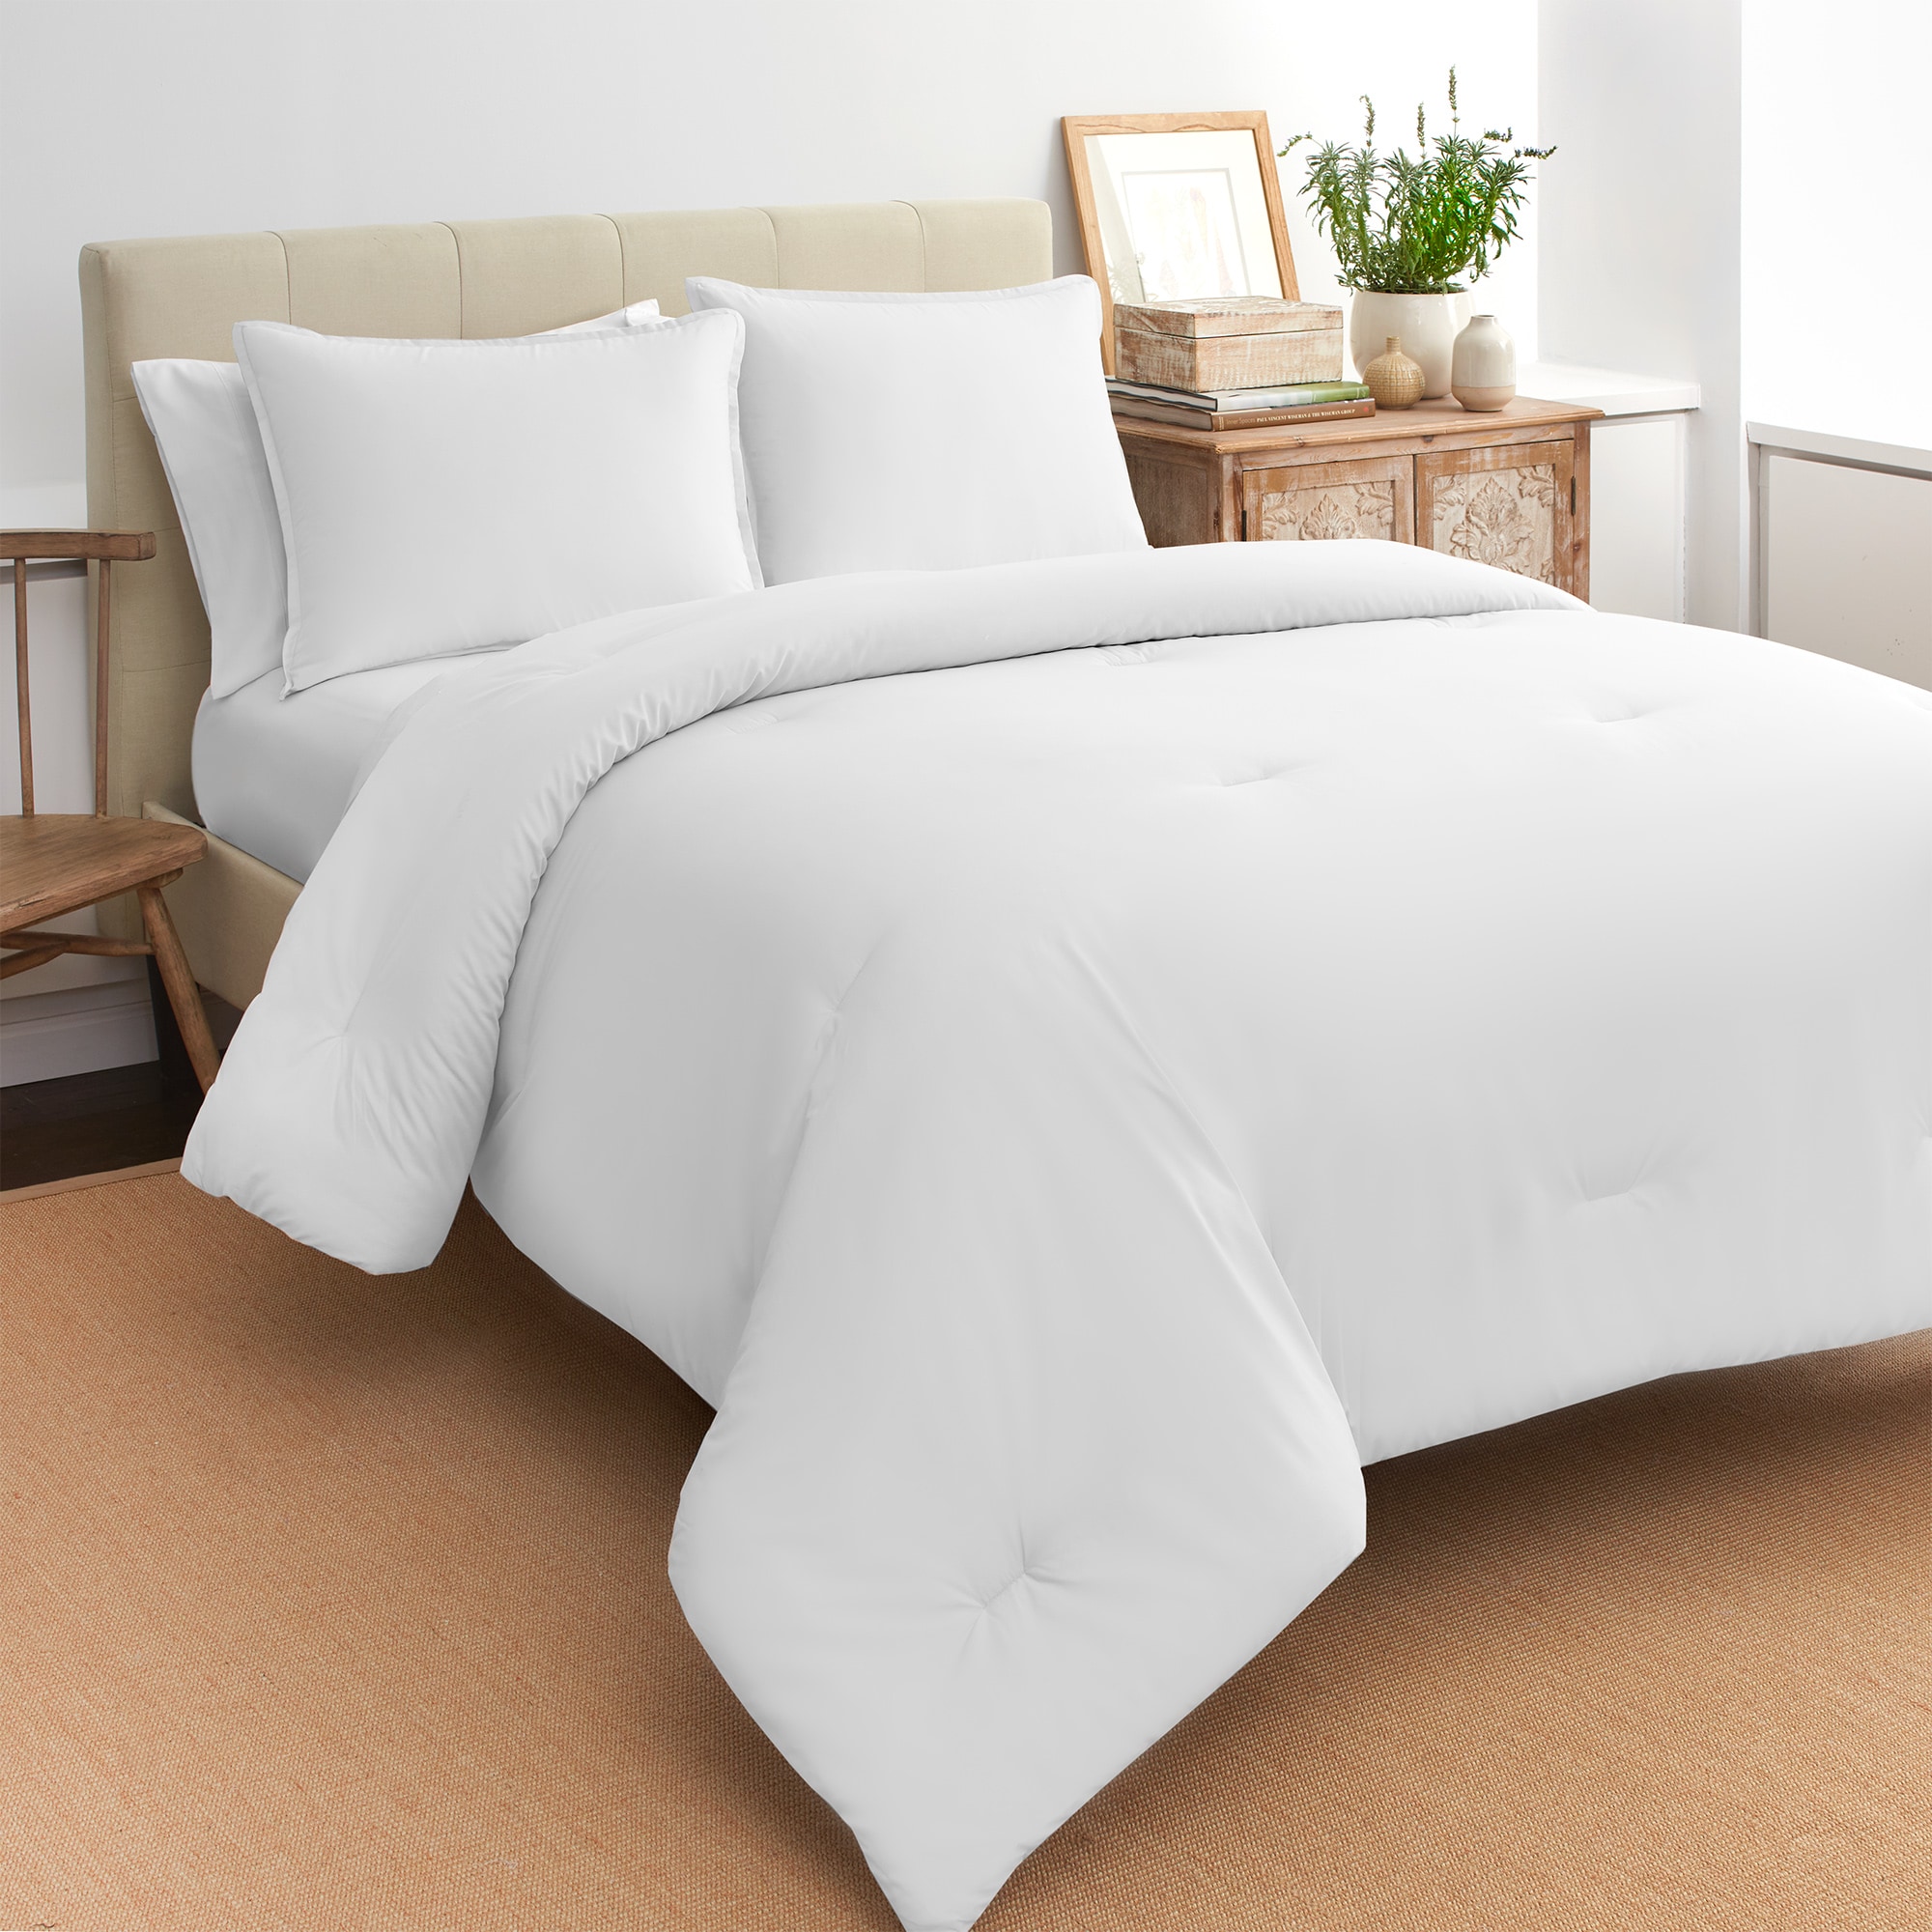 Cooling Cotton Percale Duvet Cover Size Full/Queen in White | Best Luxury Sheets for Hot Sleepers by Brooklinen - Holiday Gift Ideas